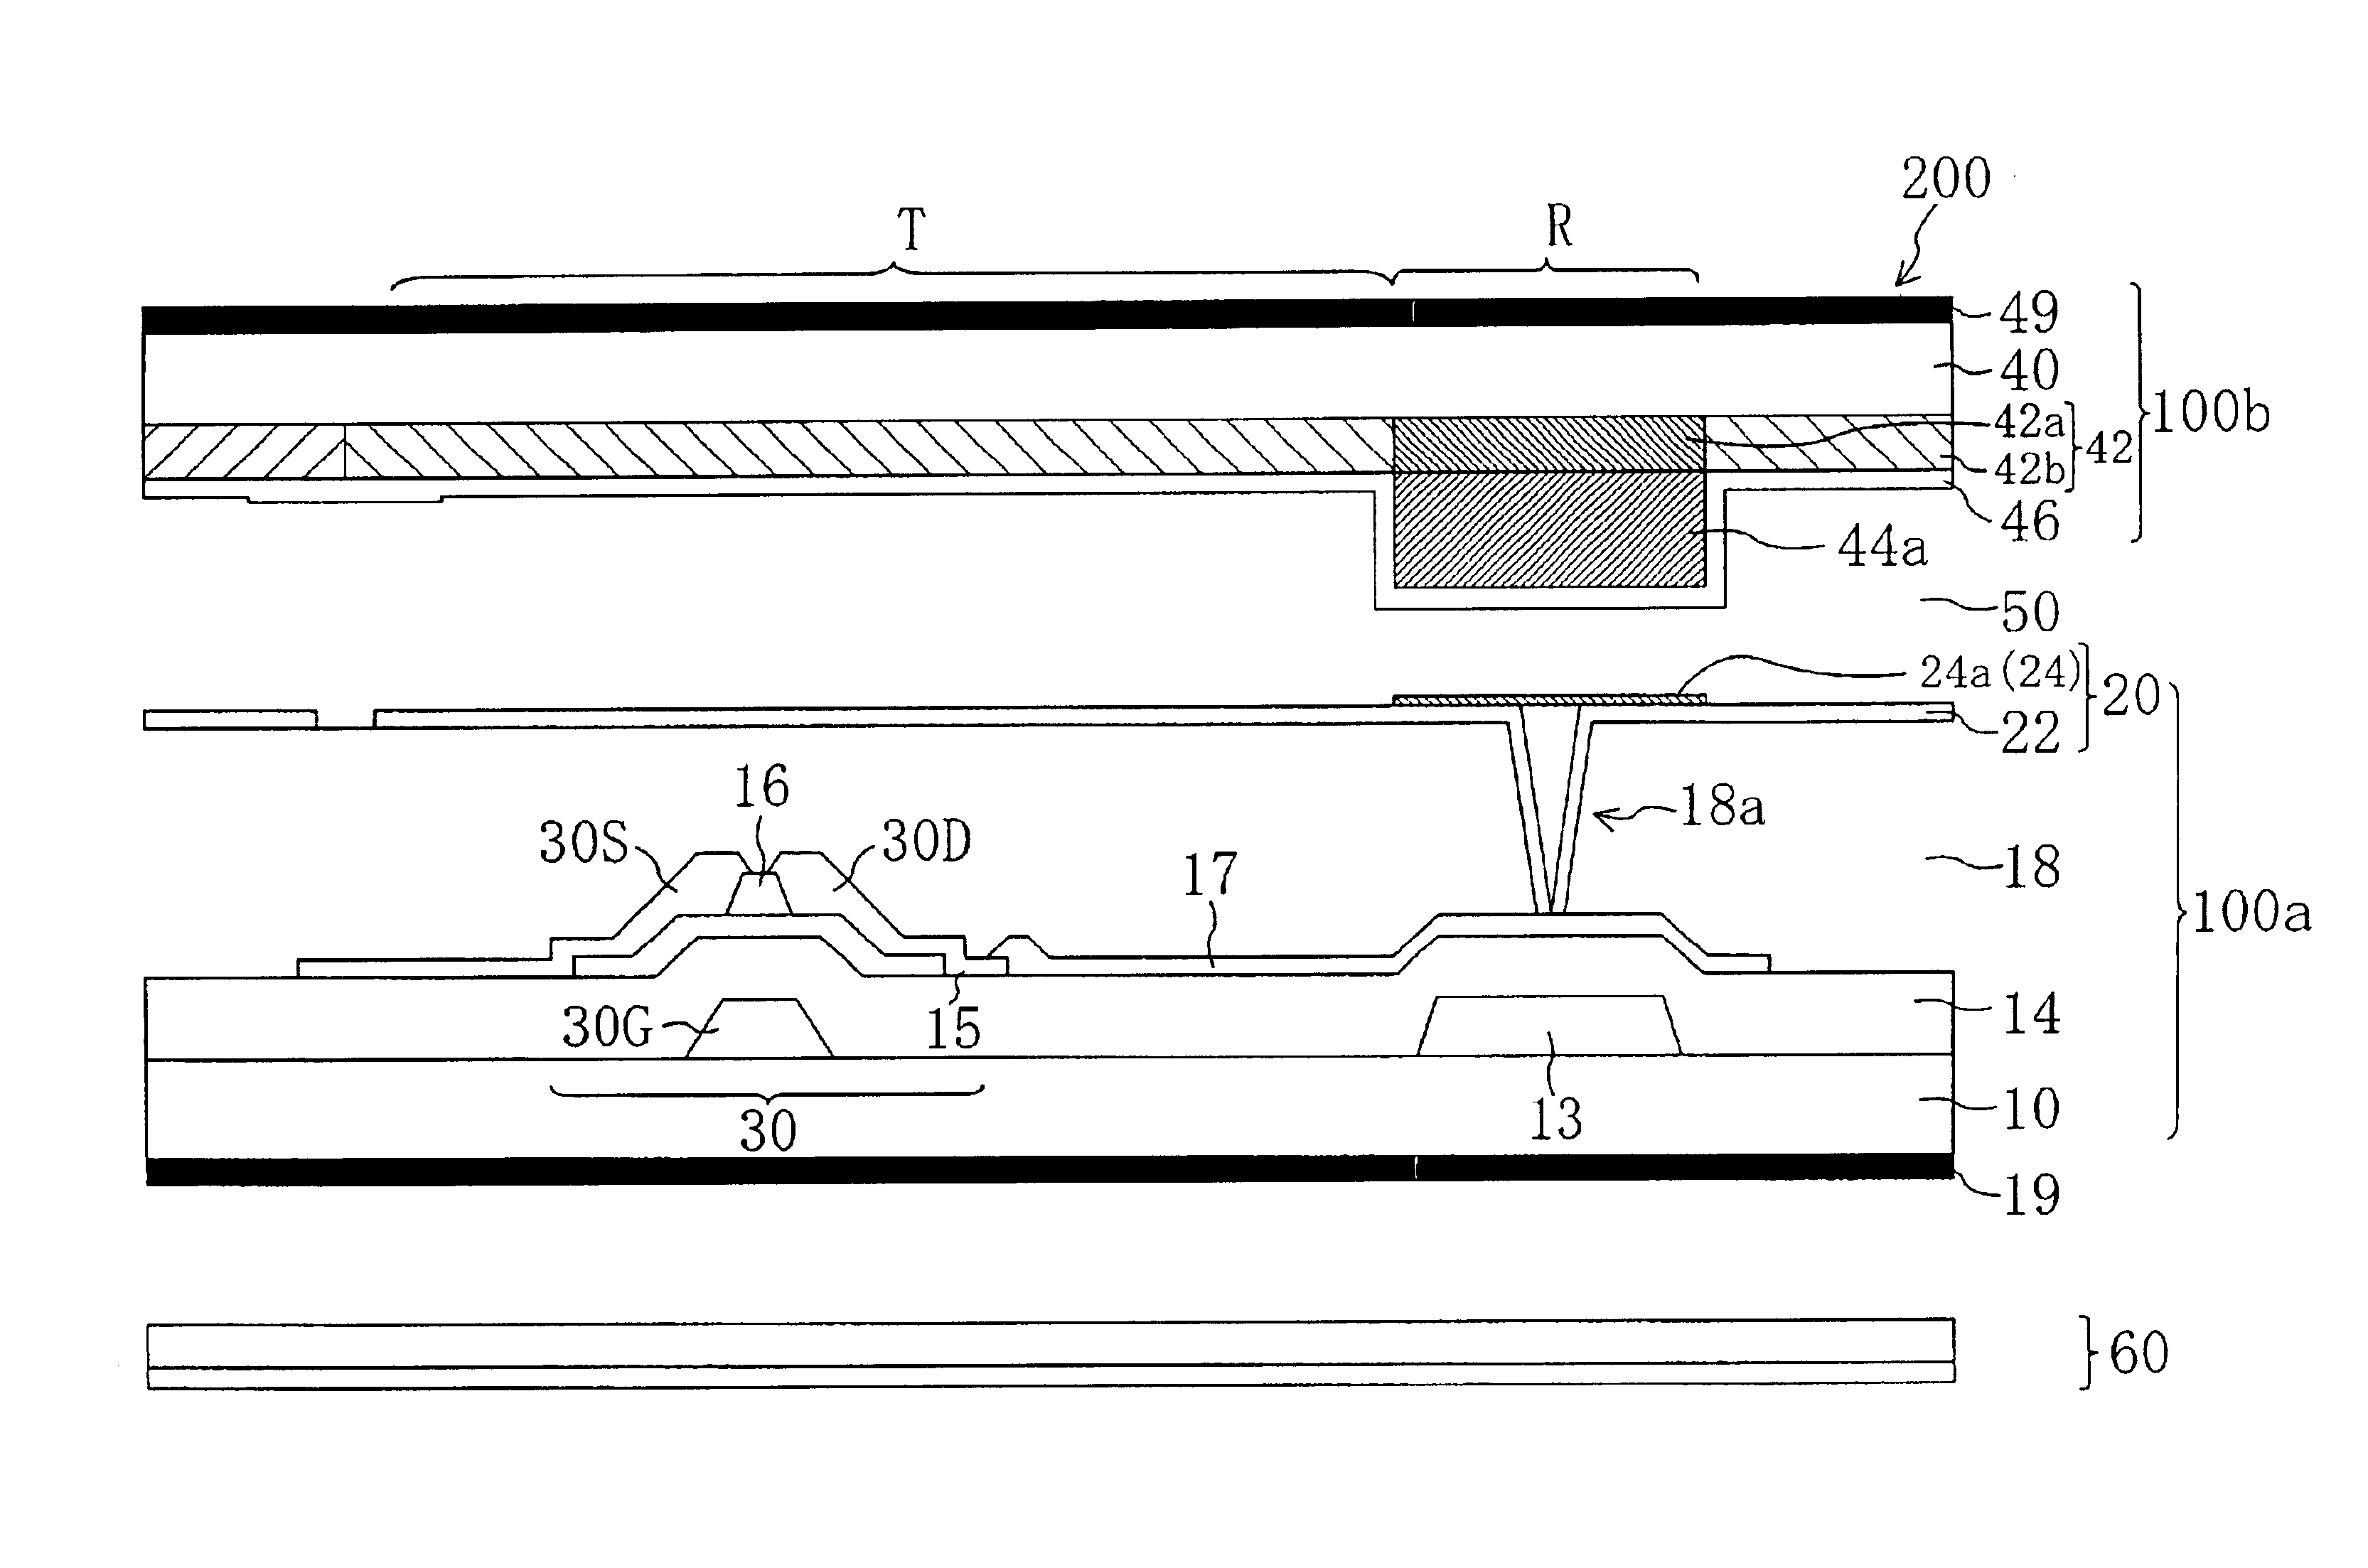 Transflective liquid crystal display device with substrate having greater height in reflective region